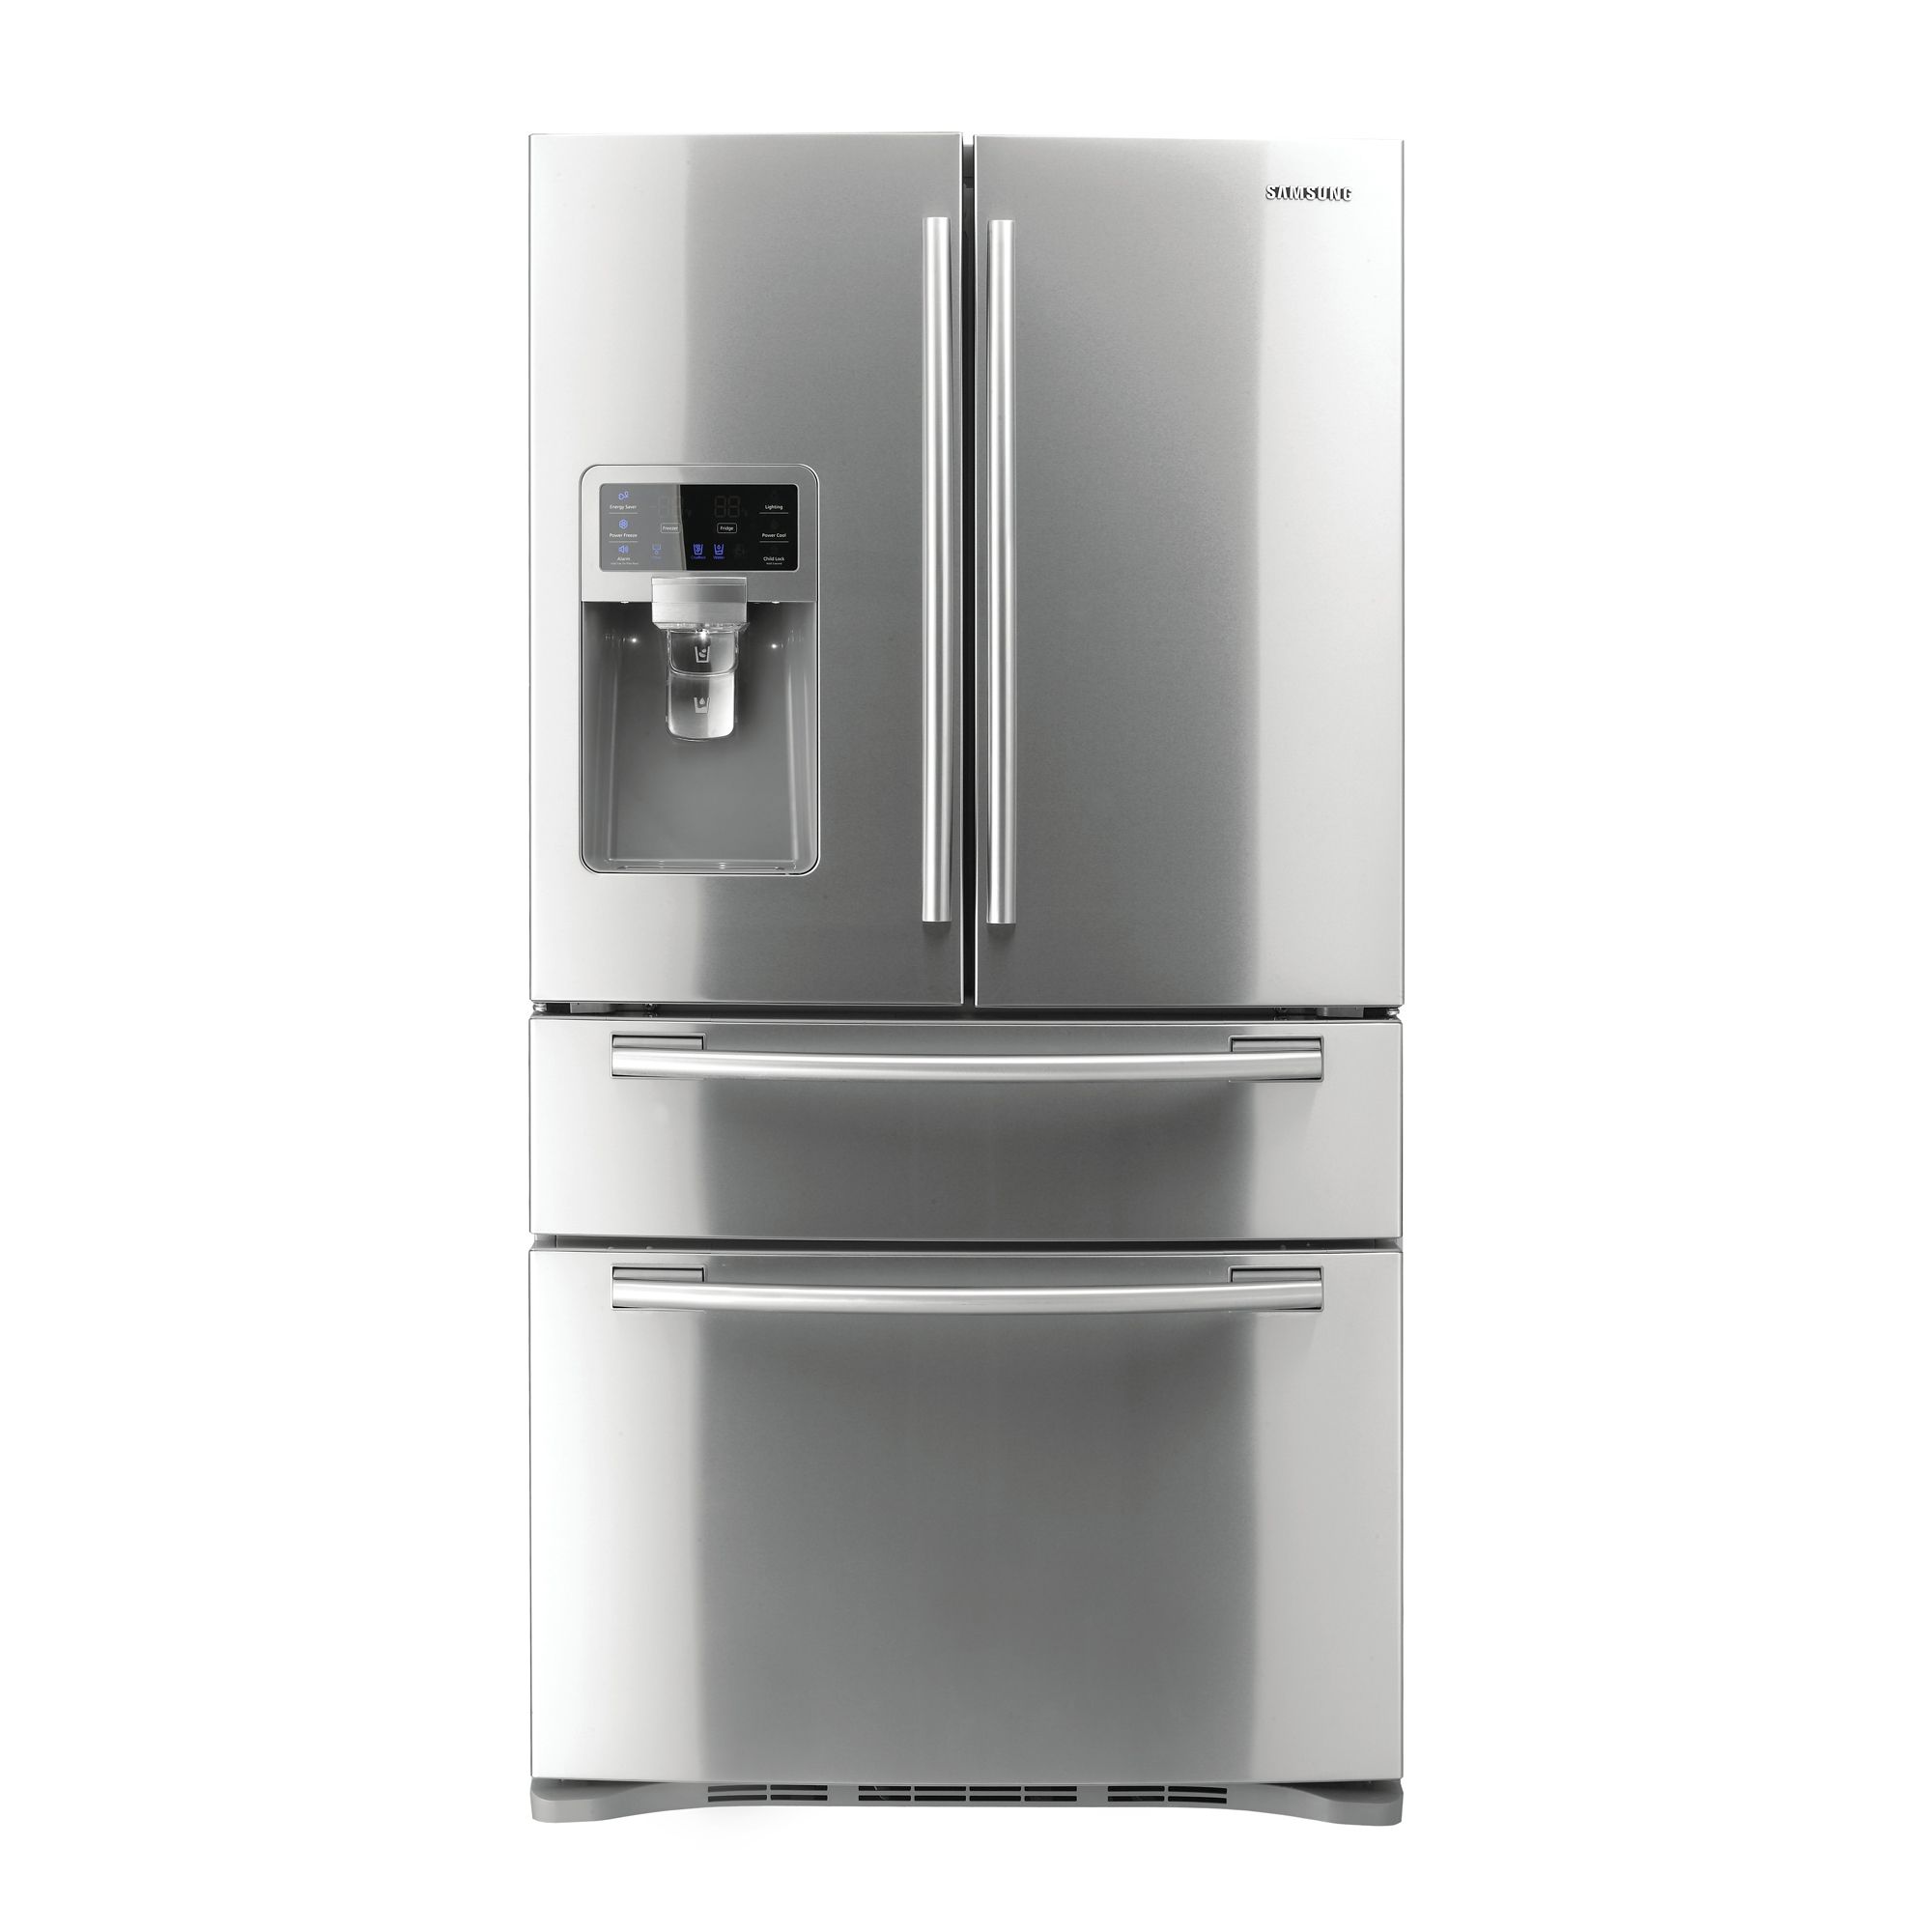 Samsung 28 cu. ft. French-Door Refrigerator w/ Counter-Height Drawer - Stainless Steel